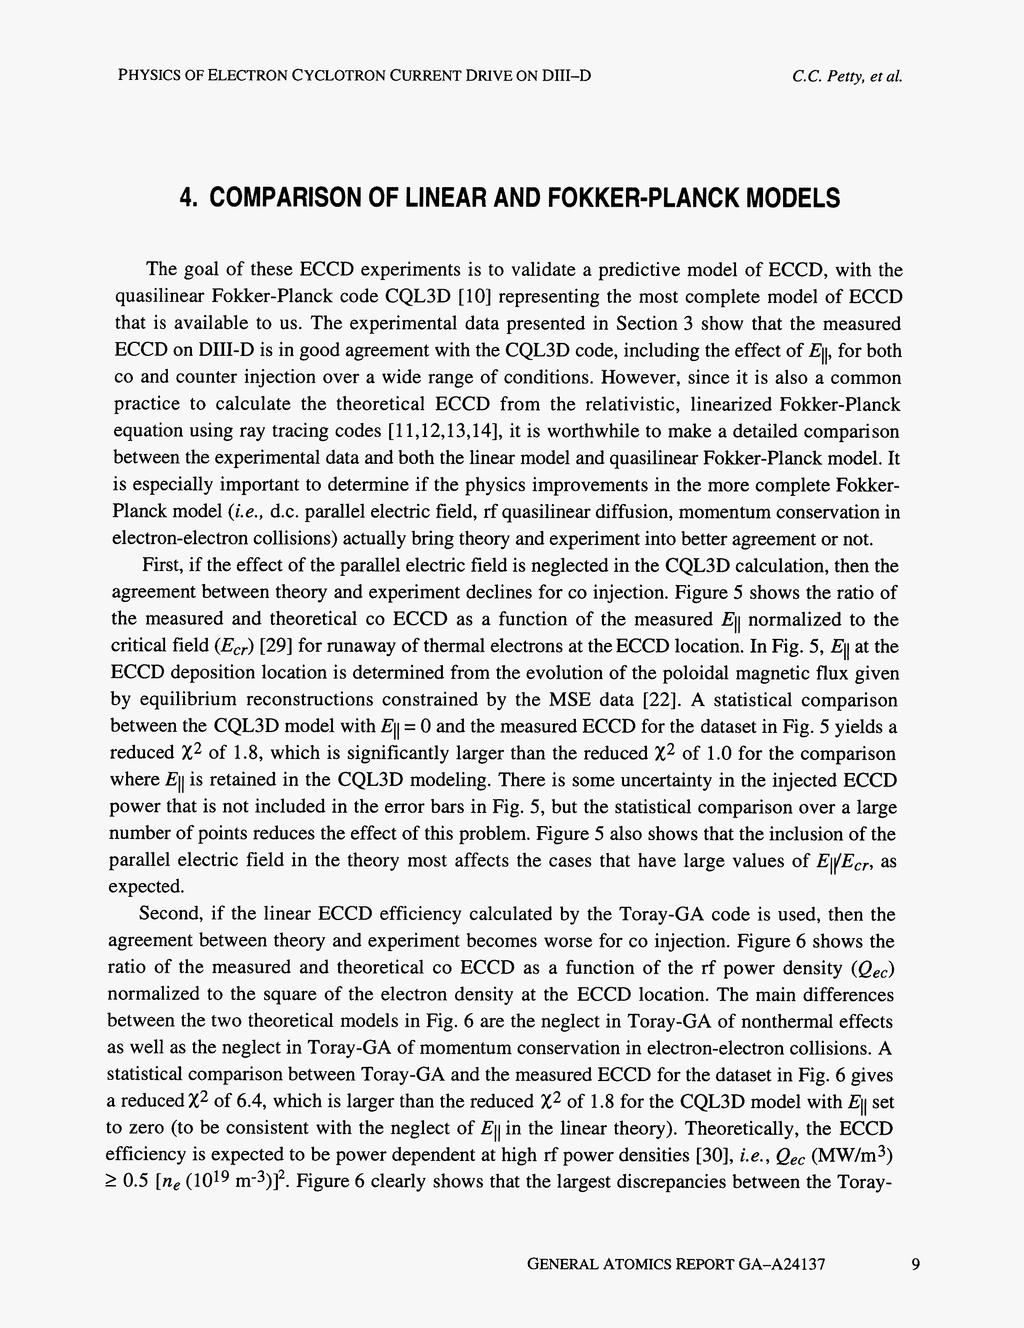 4. COMPARSON OF LNEAR AND FOKKER-PLANCK MODELS The goal of these ECCD experiments is to validate a predictive model of ECCD, with the quasilinear Fokker-Planck code CQL3D [ 0 representing the most